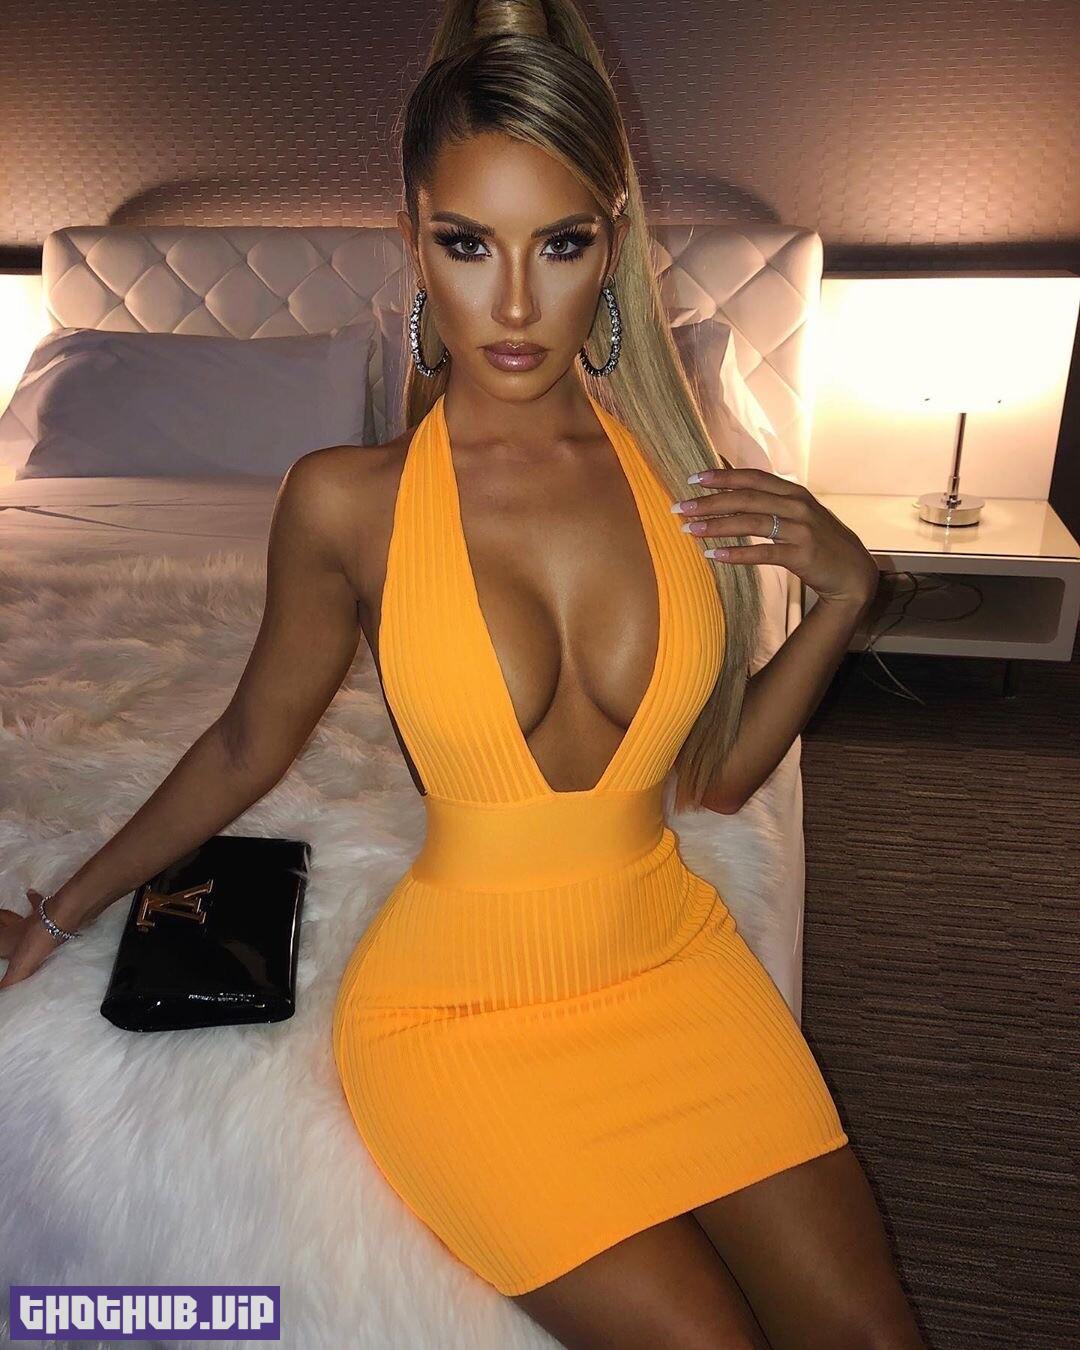 1680425712 464 Sierra Skye TheFappening Sexy 95 Photos and Videos